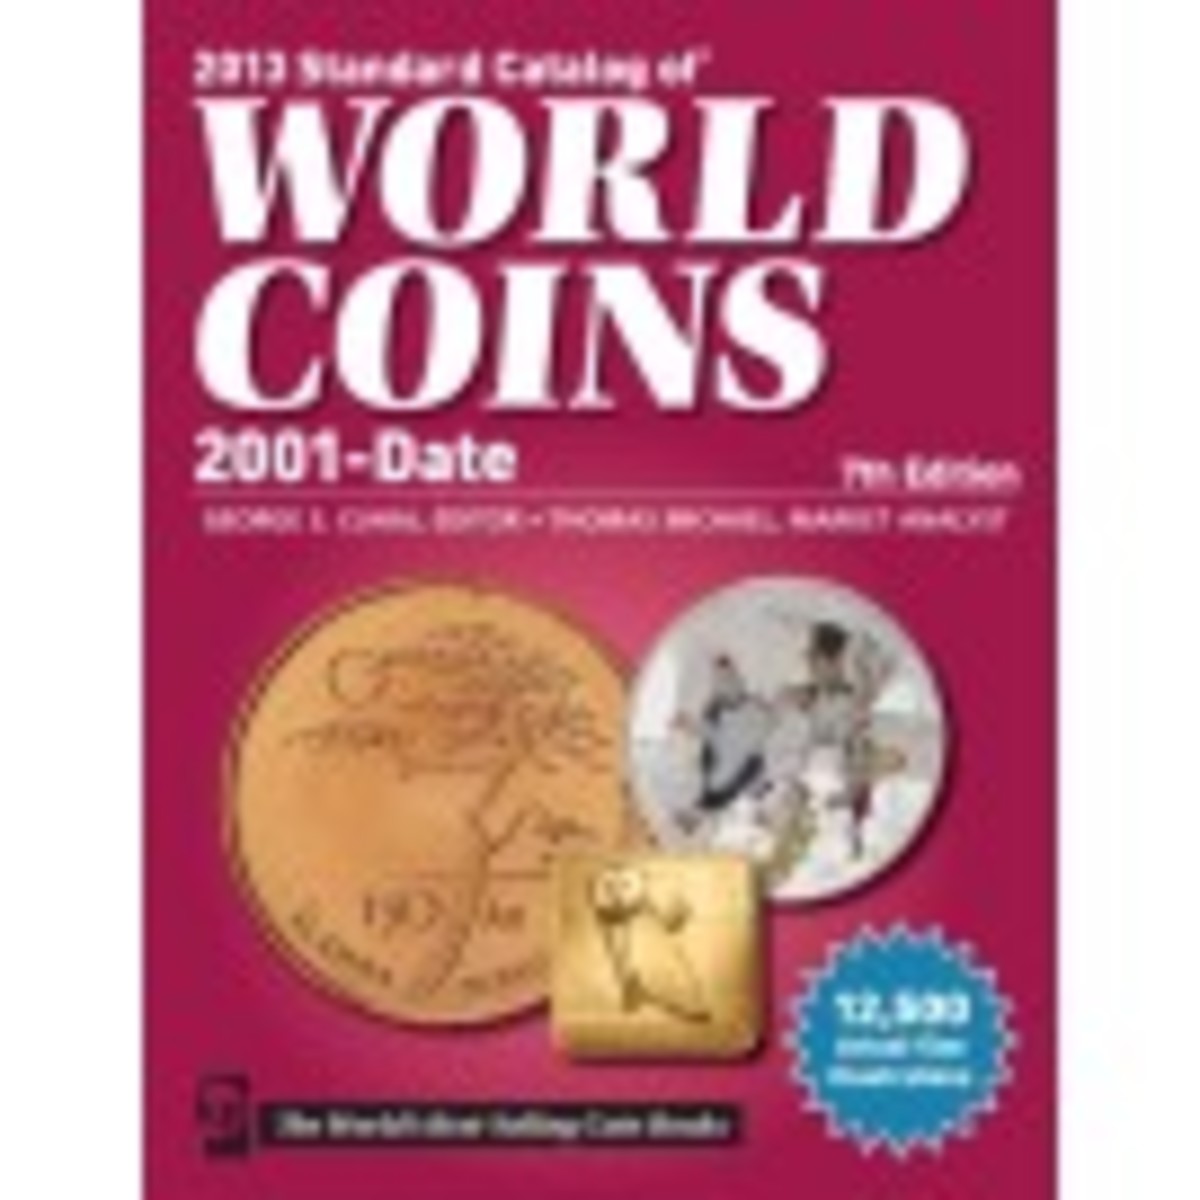 2013 Standard Catalog of World Coins 2001 to Date